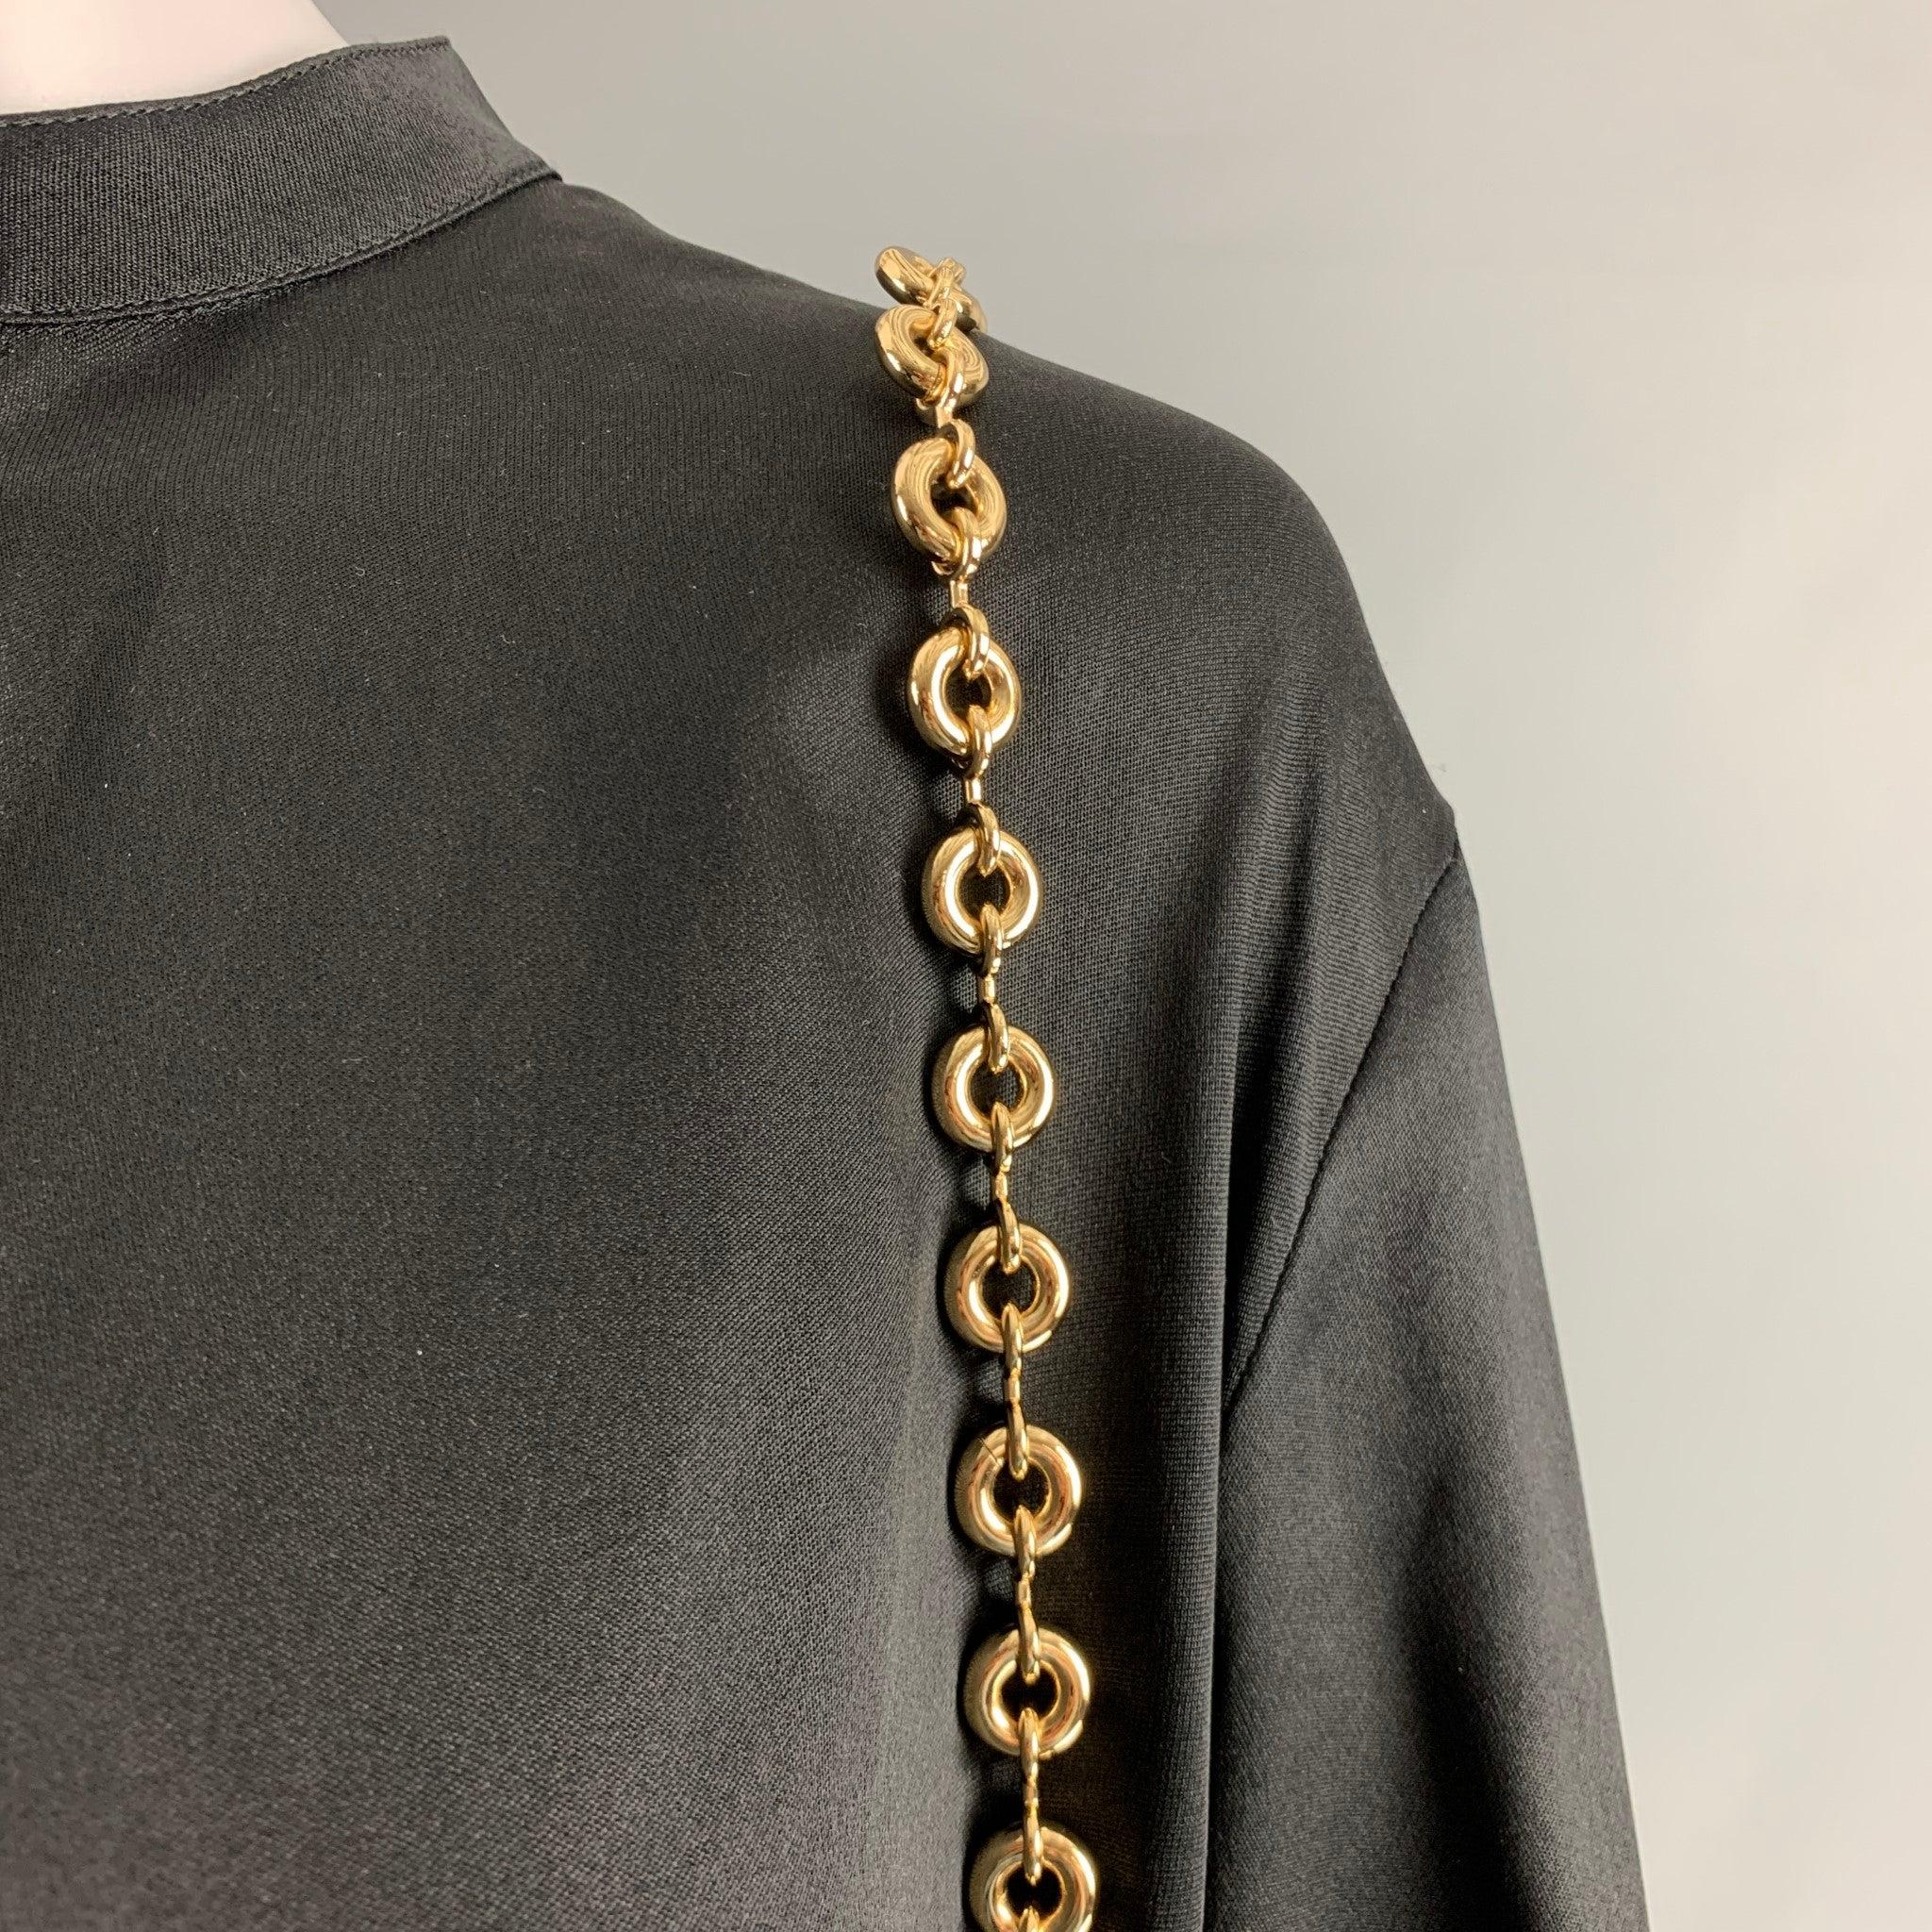 LOEWE oversized shirt dress comes in a black silk featuring a gold tone chain accent, long sleeves, collarless and a buttoned closure. New with Tags. 

Marked:   32 

Measurements: 
 
Shoulder: 17 inches Bust: 44 inches Hip: 49 inches Sleeve: 23.5